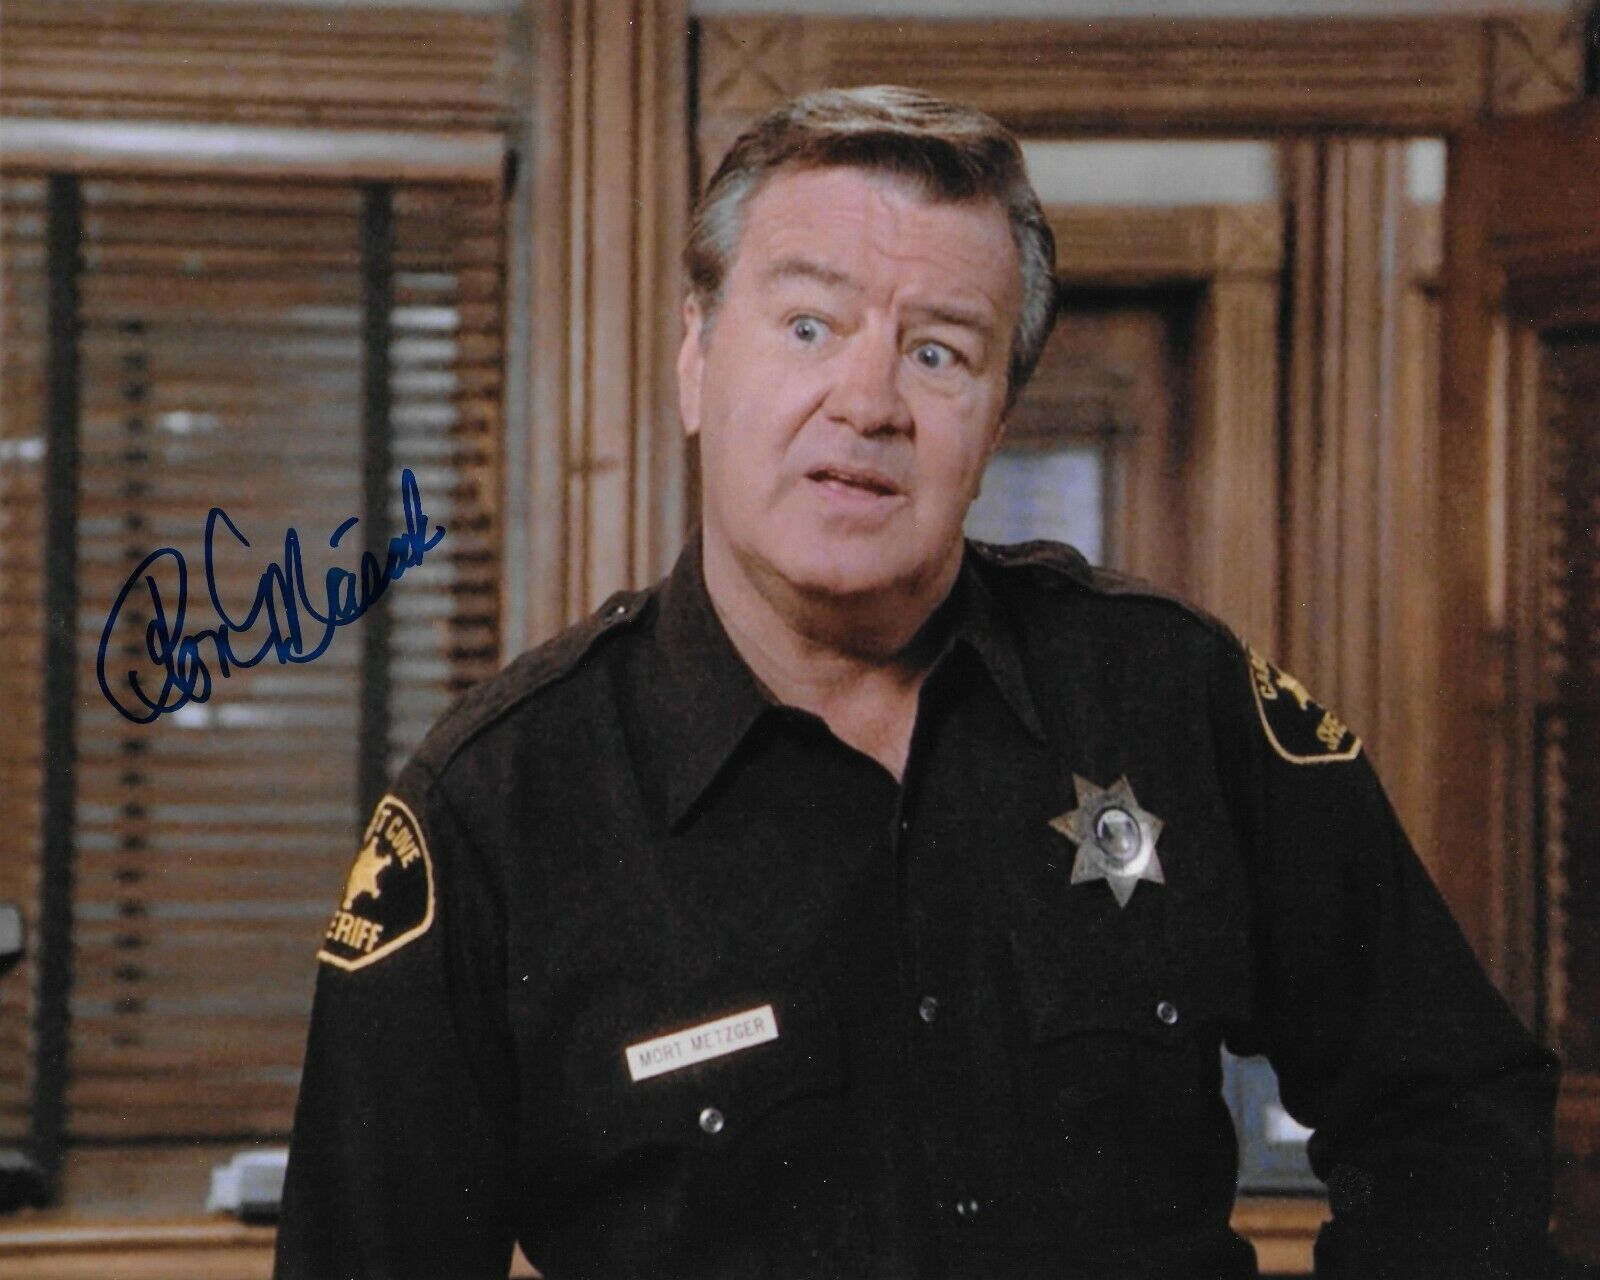 Ron Masak Murder, She Wrote Original Autographed 8x10 Photo Poster painting #2